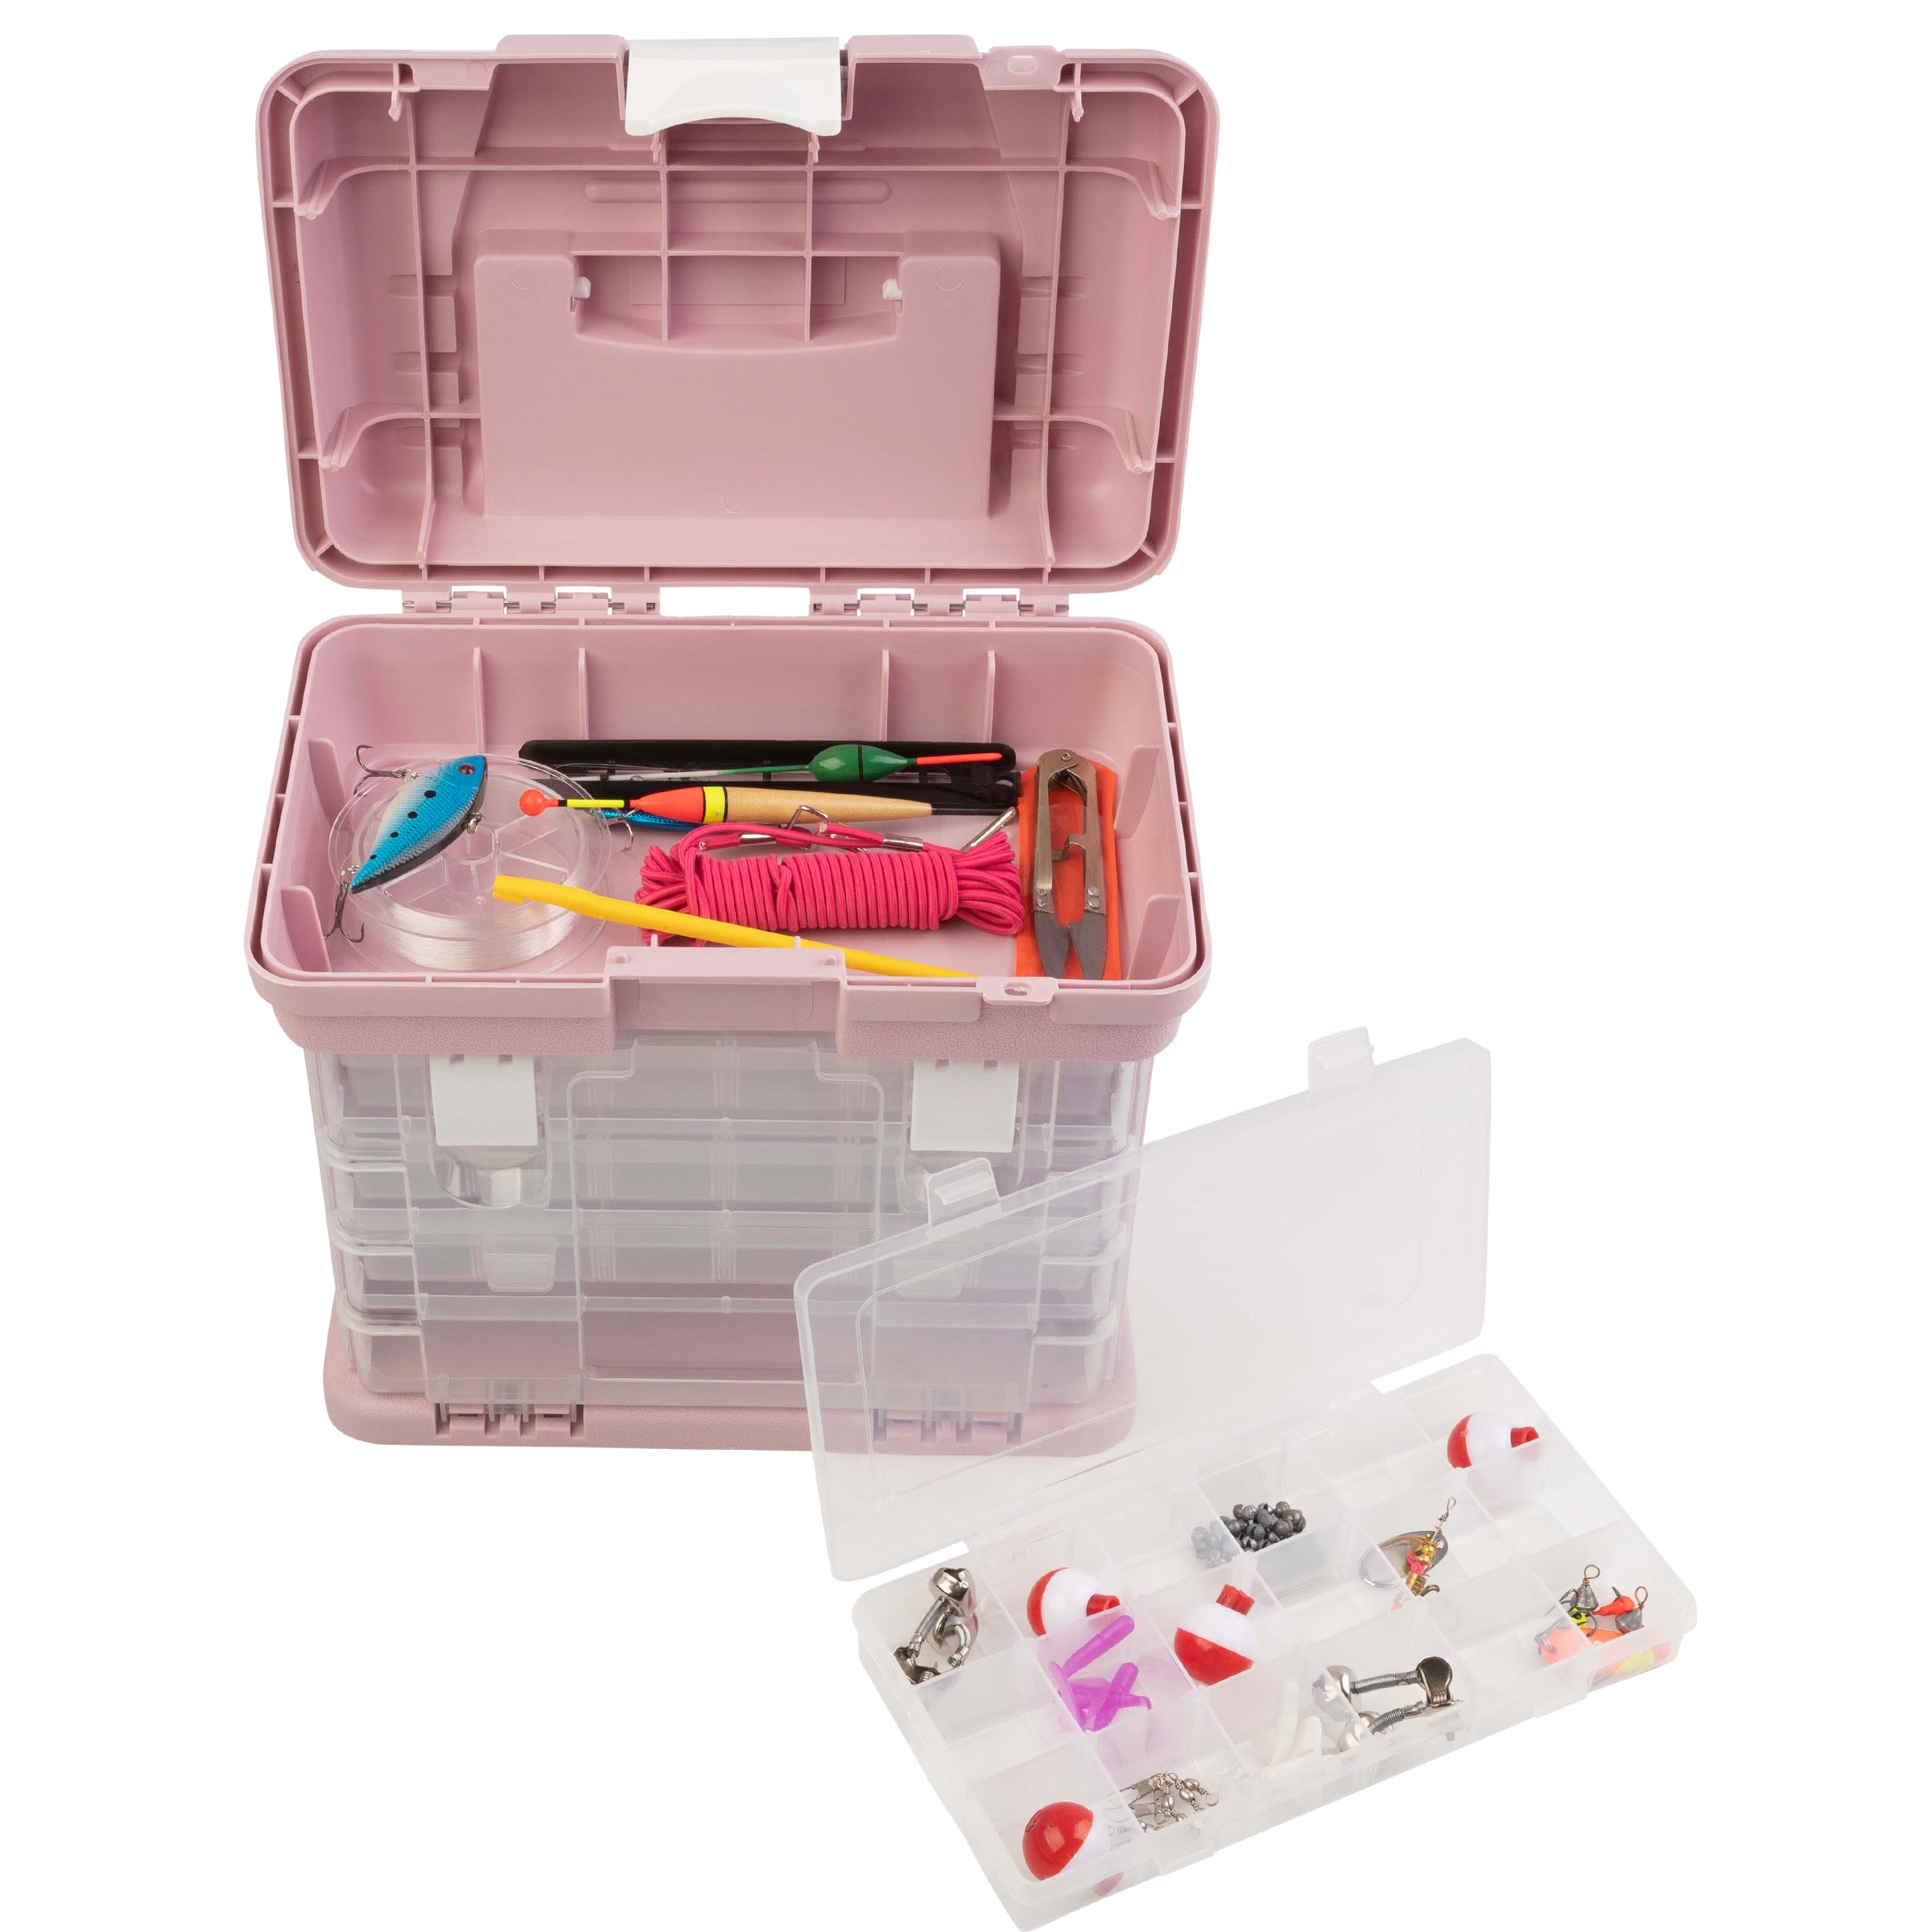 Tool Craft DIY Box with inner lift off storage trays - Four